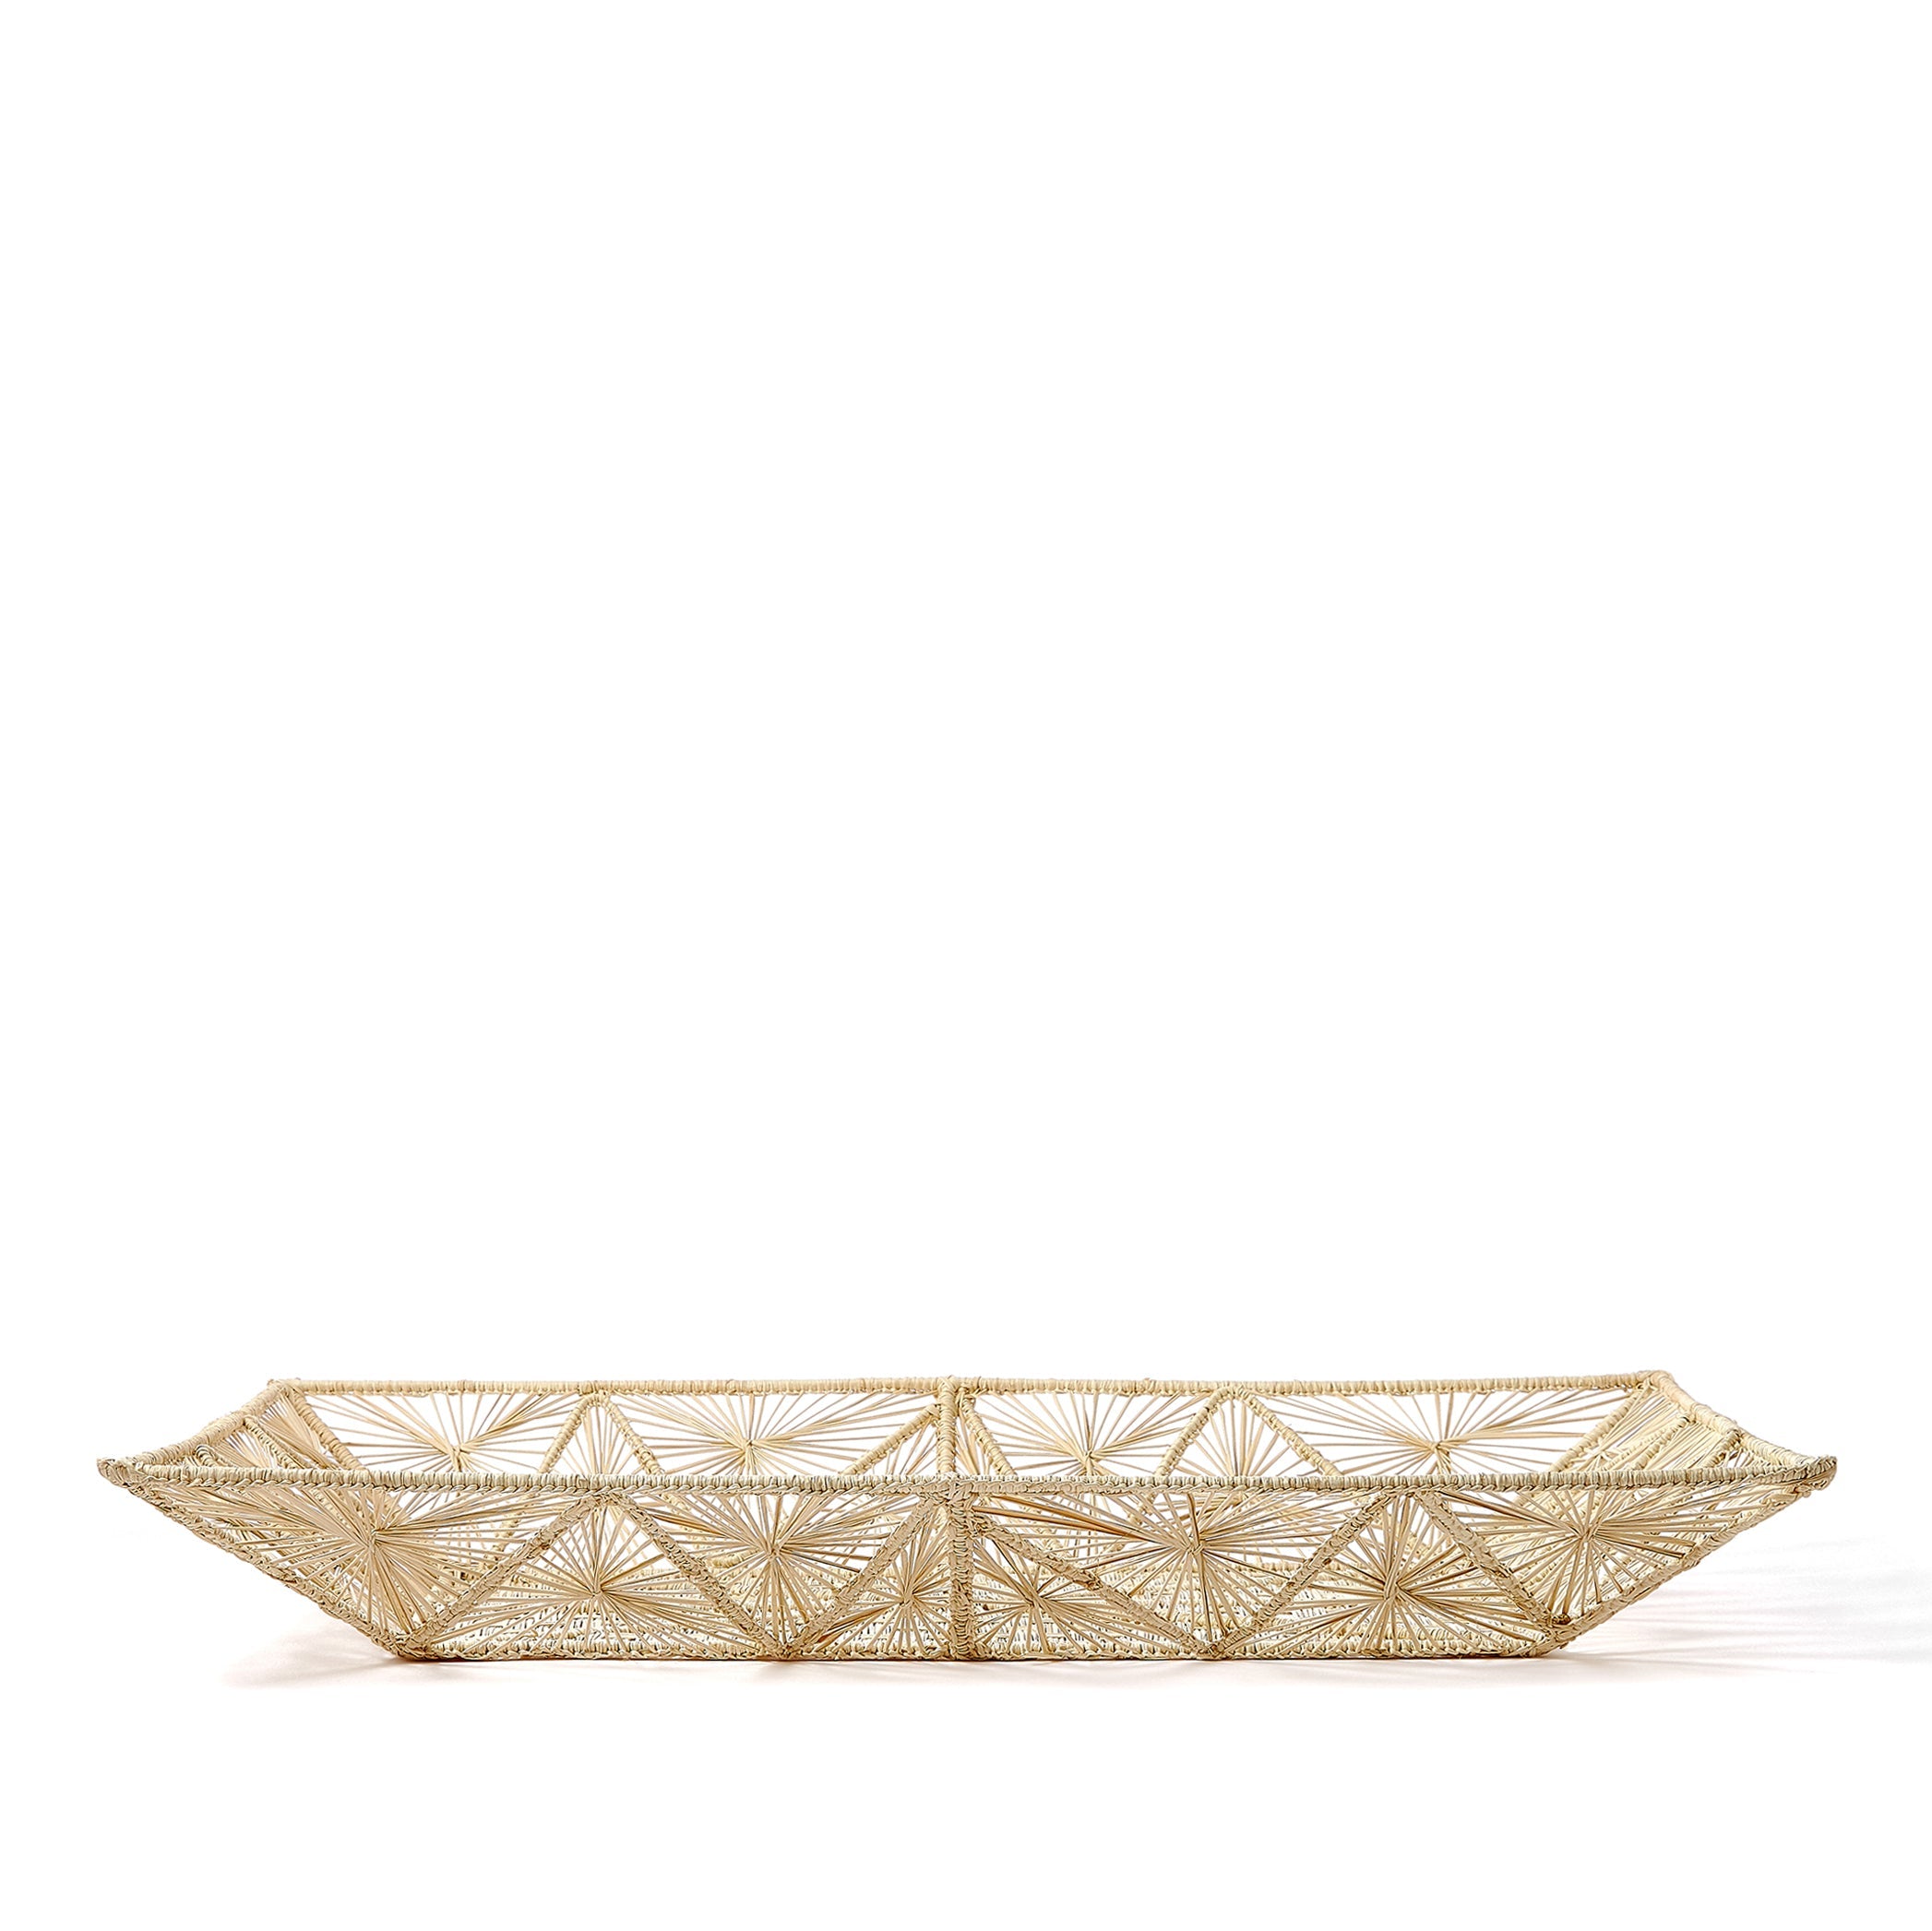 Handwoven Rectangular Tray in Natural, 46cm